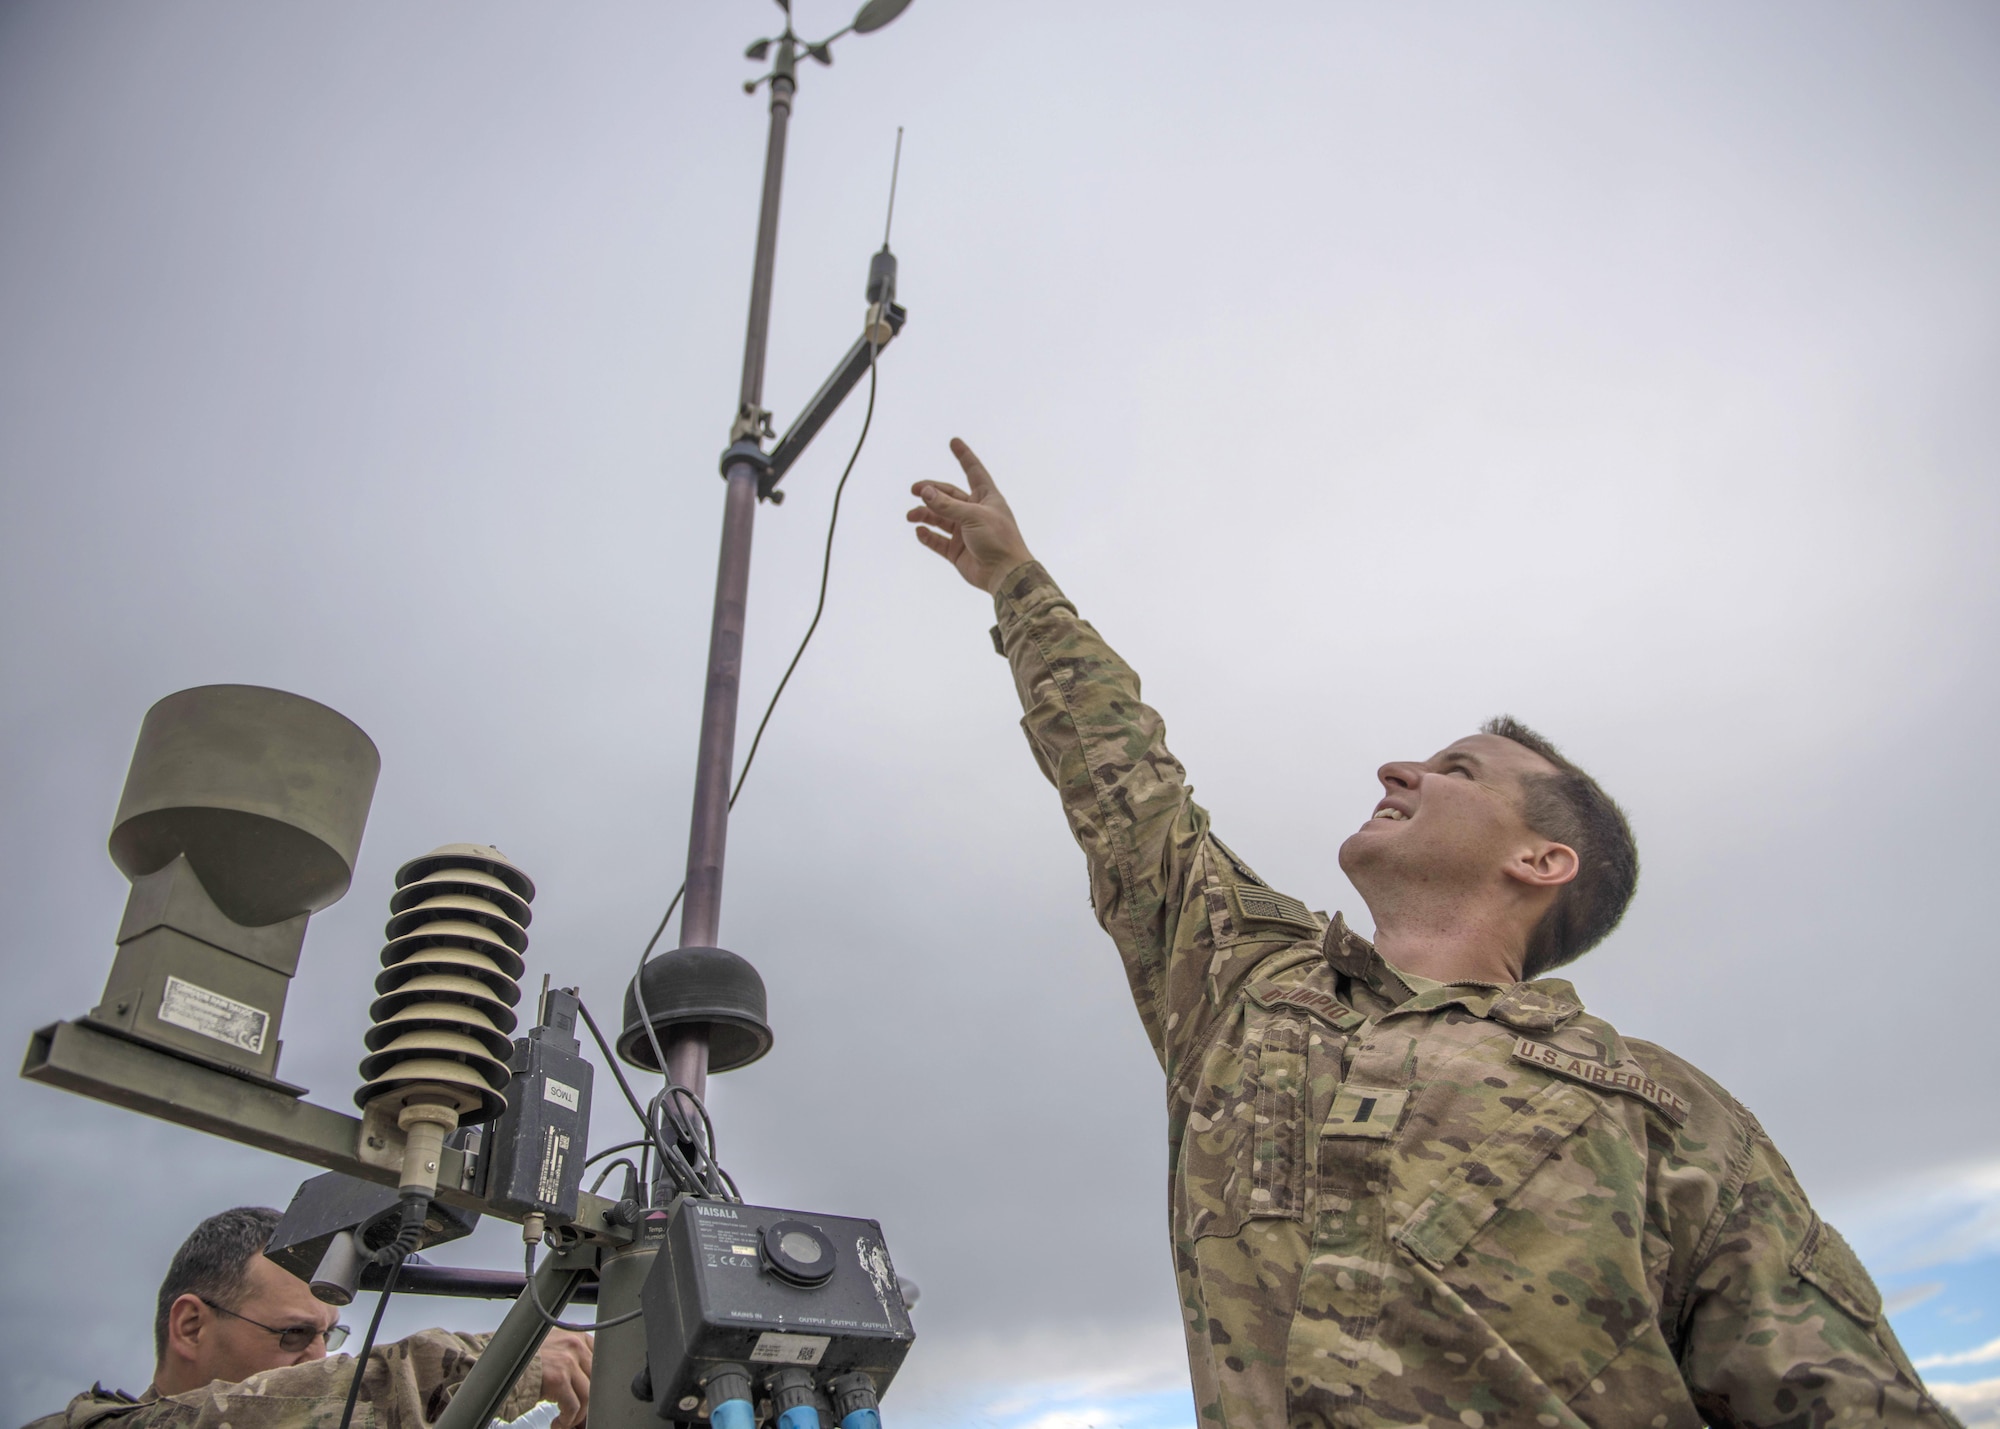 1st Lt. Justin D'olimpio, 455th Expeditionary Operations Support Squadron weather flight commander, points at a Tactical Meteorological Observation System, or TMQ-53, at Bagram Airfield, Afghanistan, May 16, 2016. Global weather stations like these feed meteorological data collection efforts logged by Airmen at the 14th Weather Squadron in Asheville, North Carolina. (U.S. Air Force photo by Senior Airman Justyn M. Freeman)
